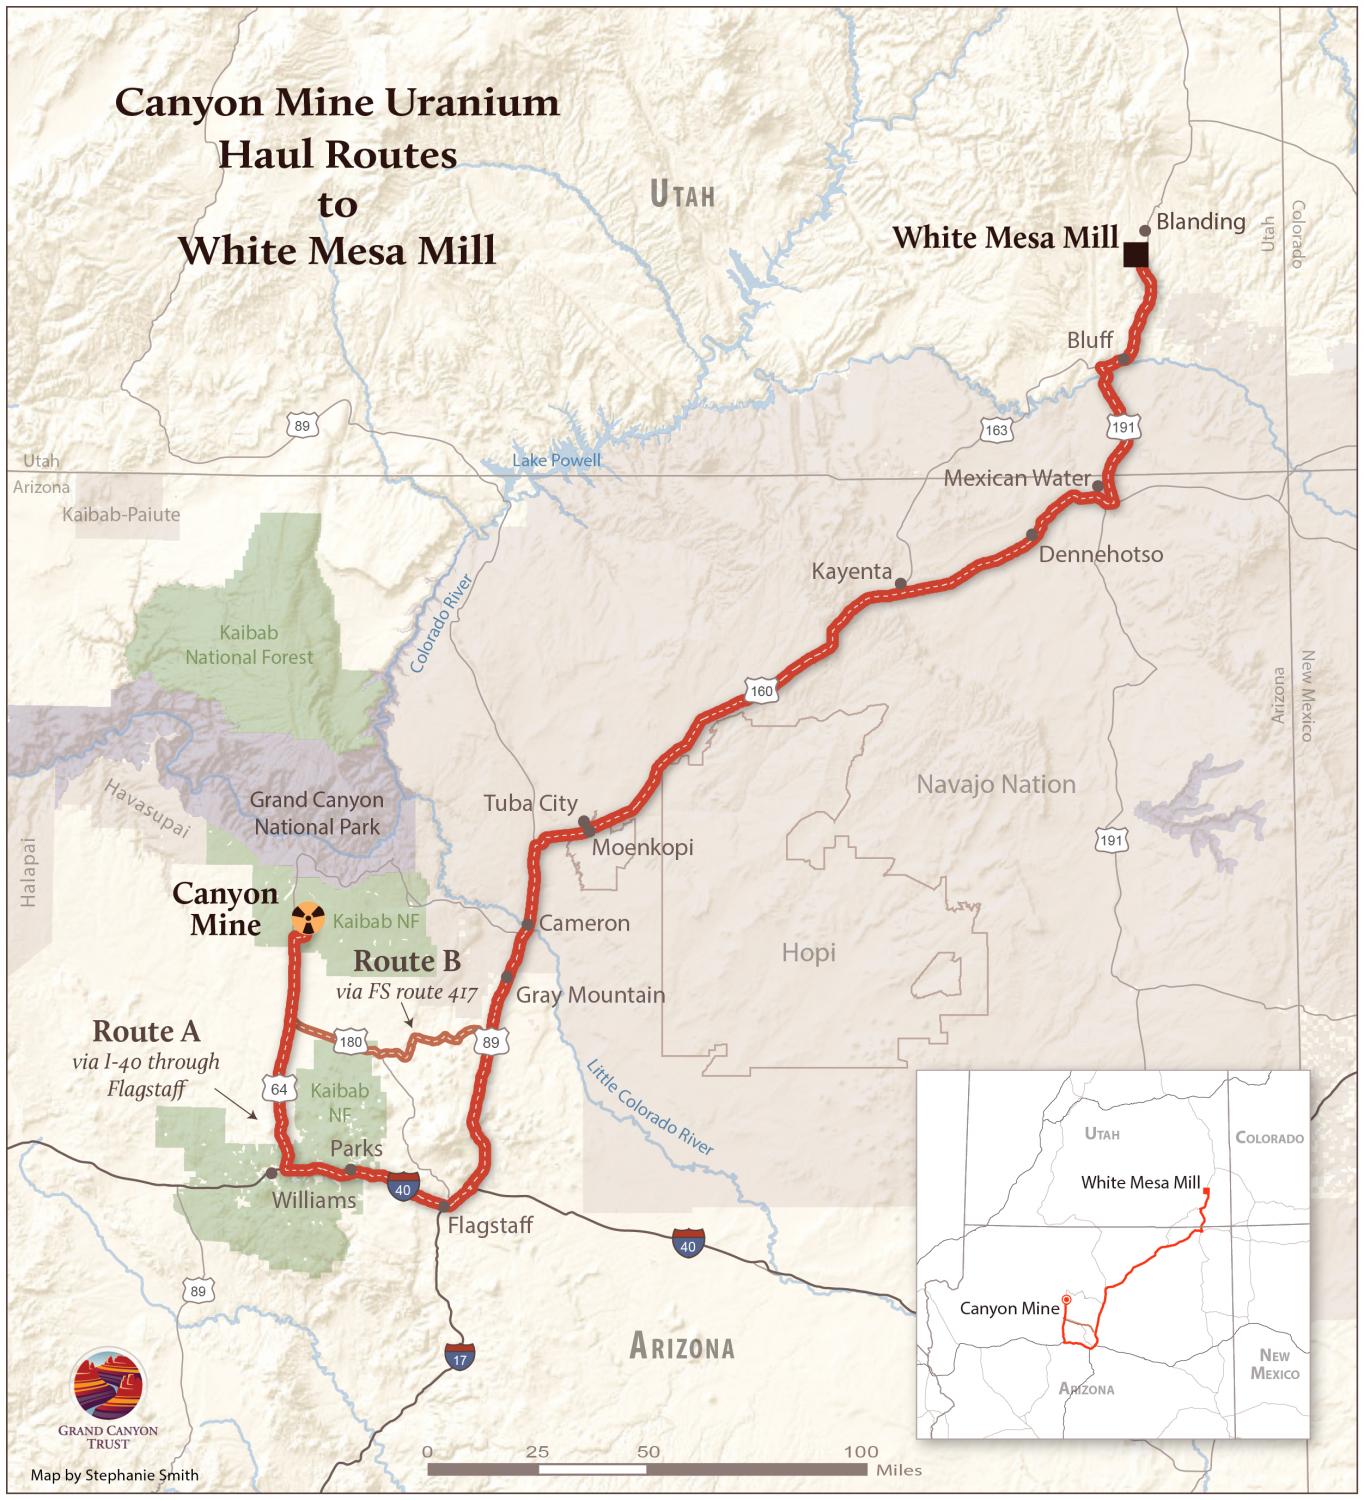 Uranium haul routes from Canyon Mine.